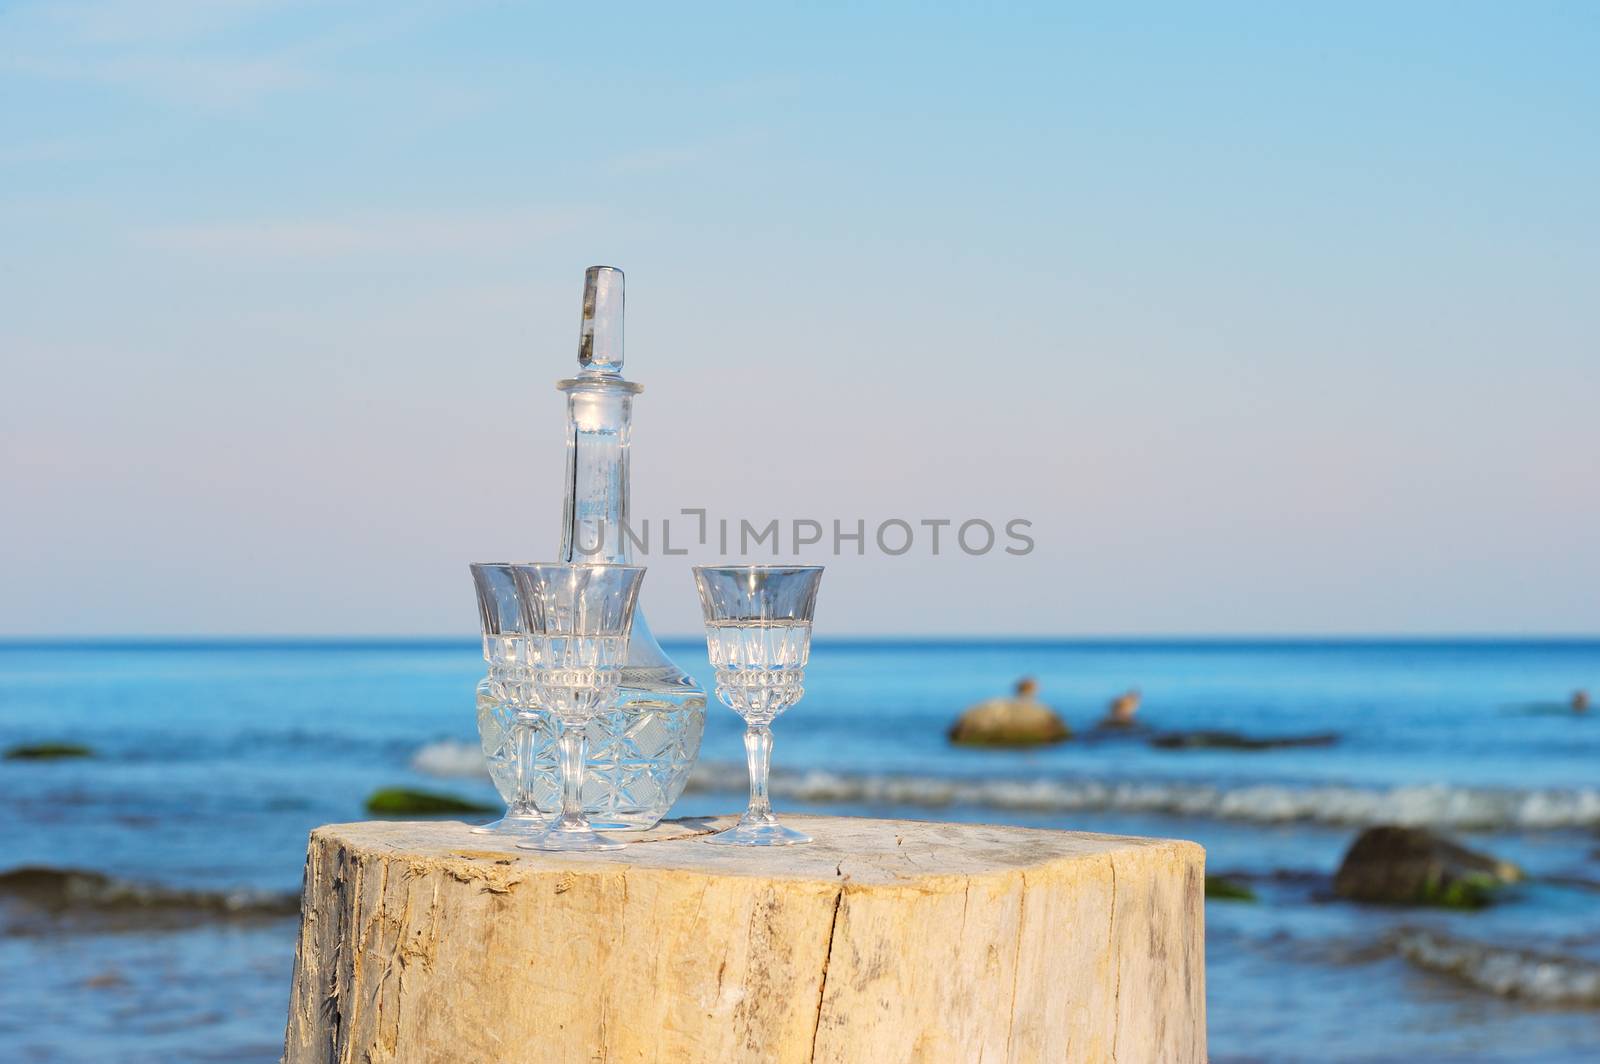 Crystal glasses and decanter on the stump at the sea